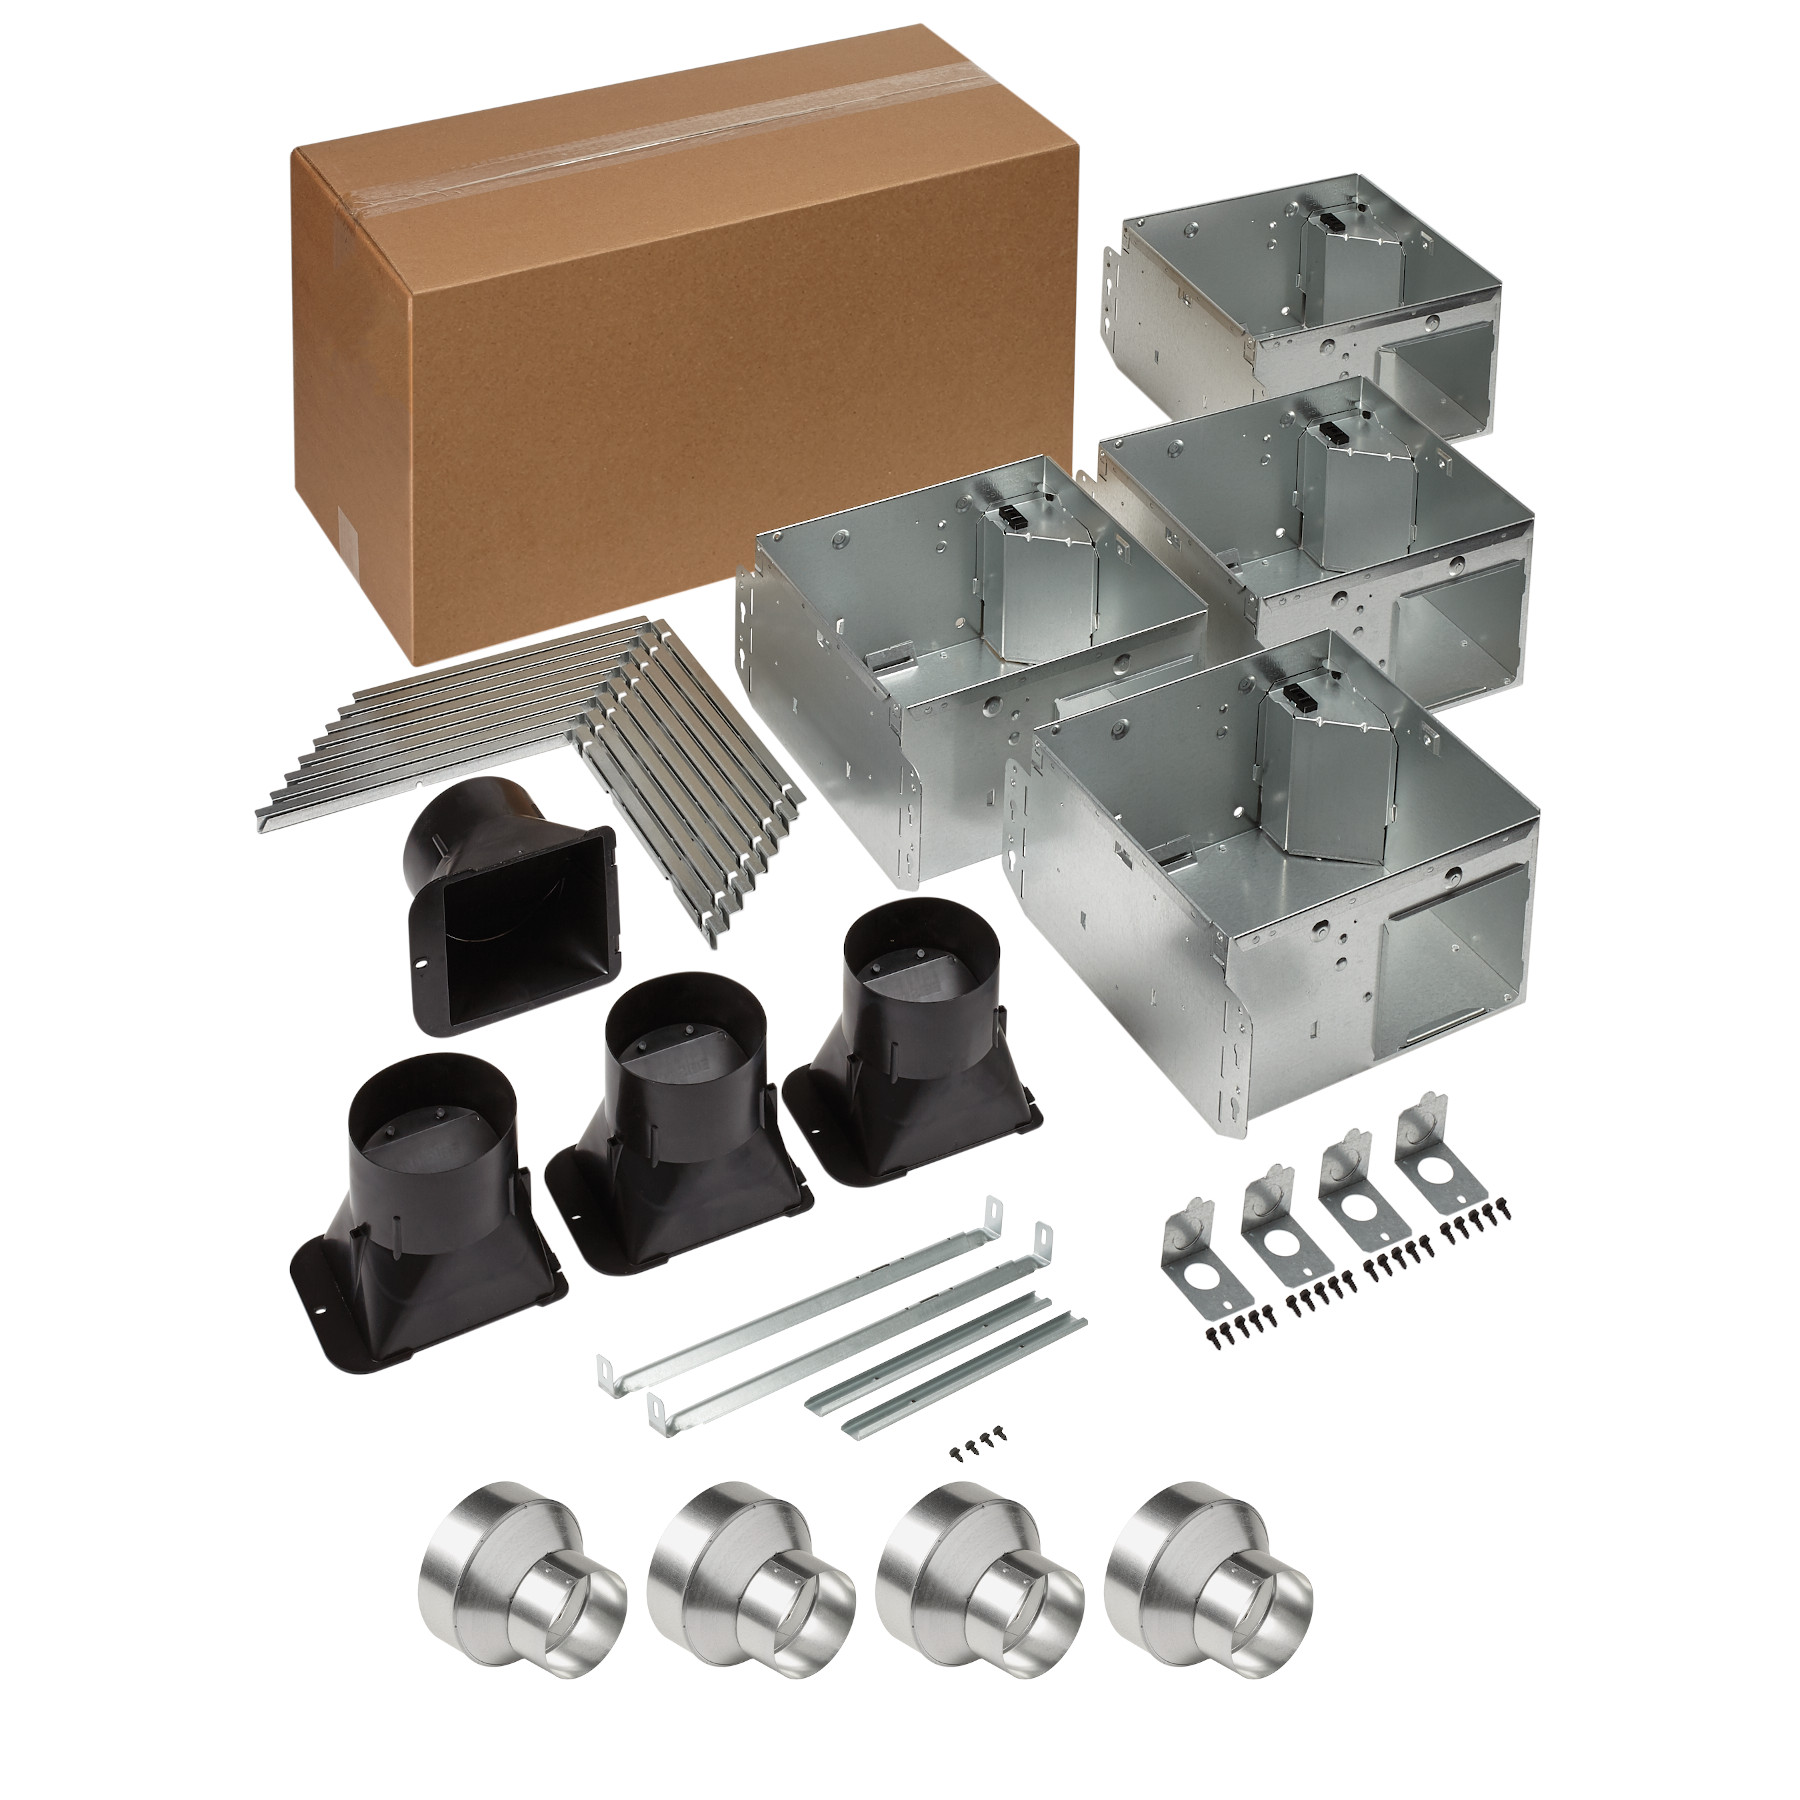 Broan® Ventilation Fan housing pack with 4" to 6" adaptors